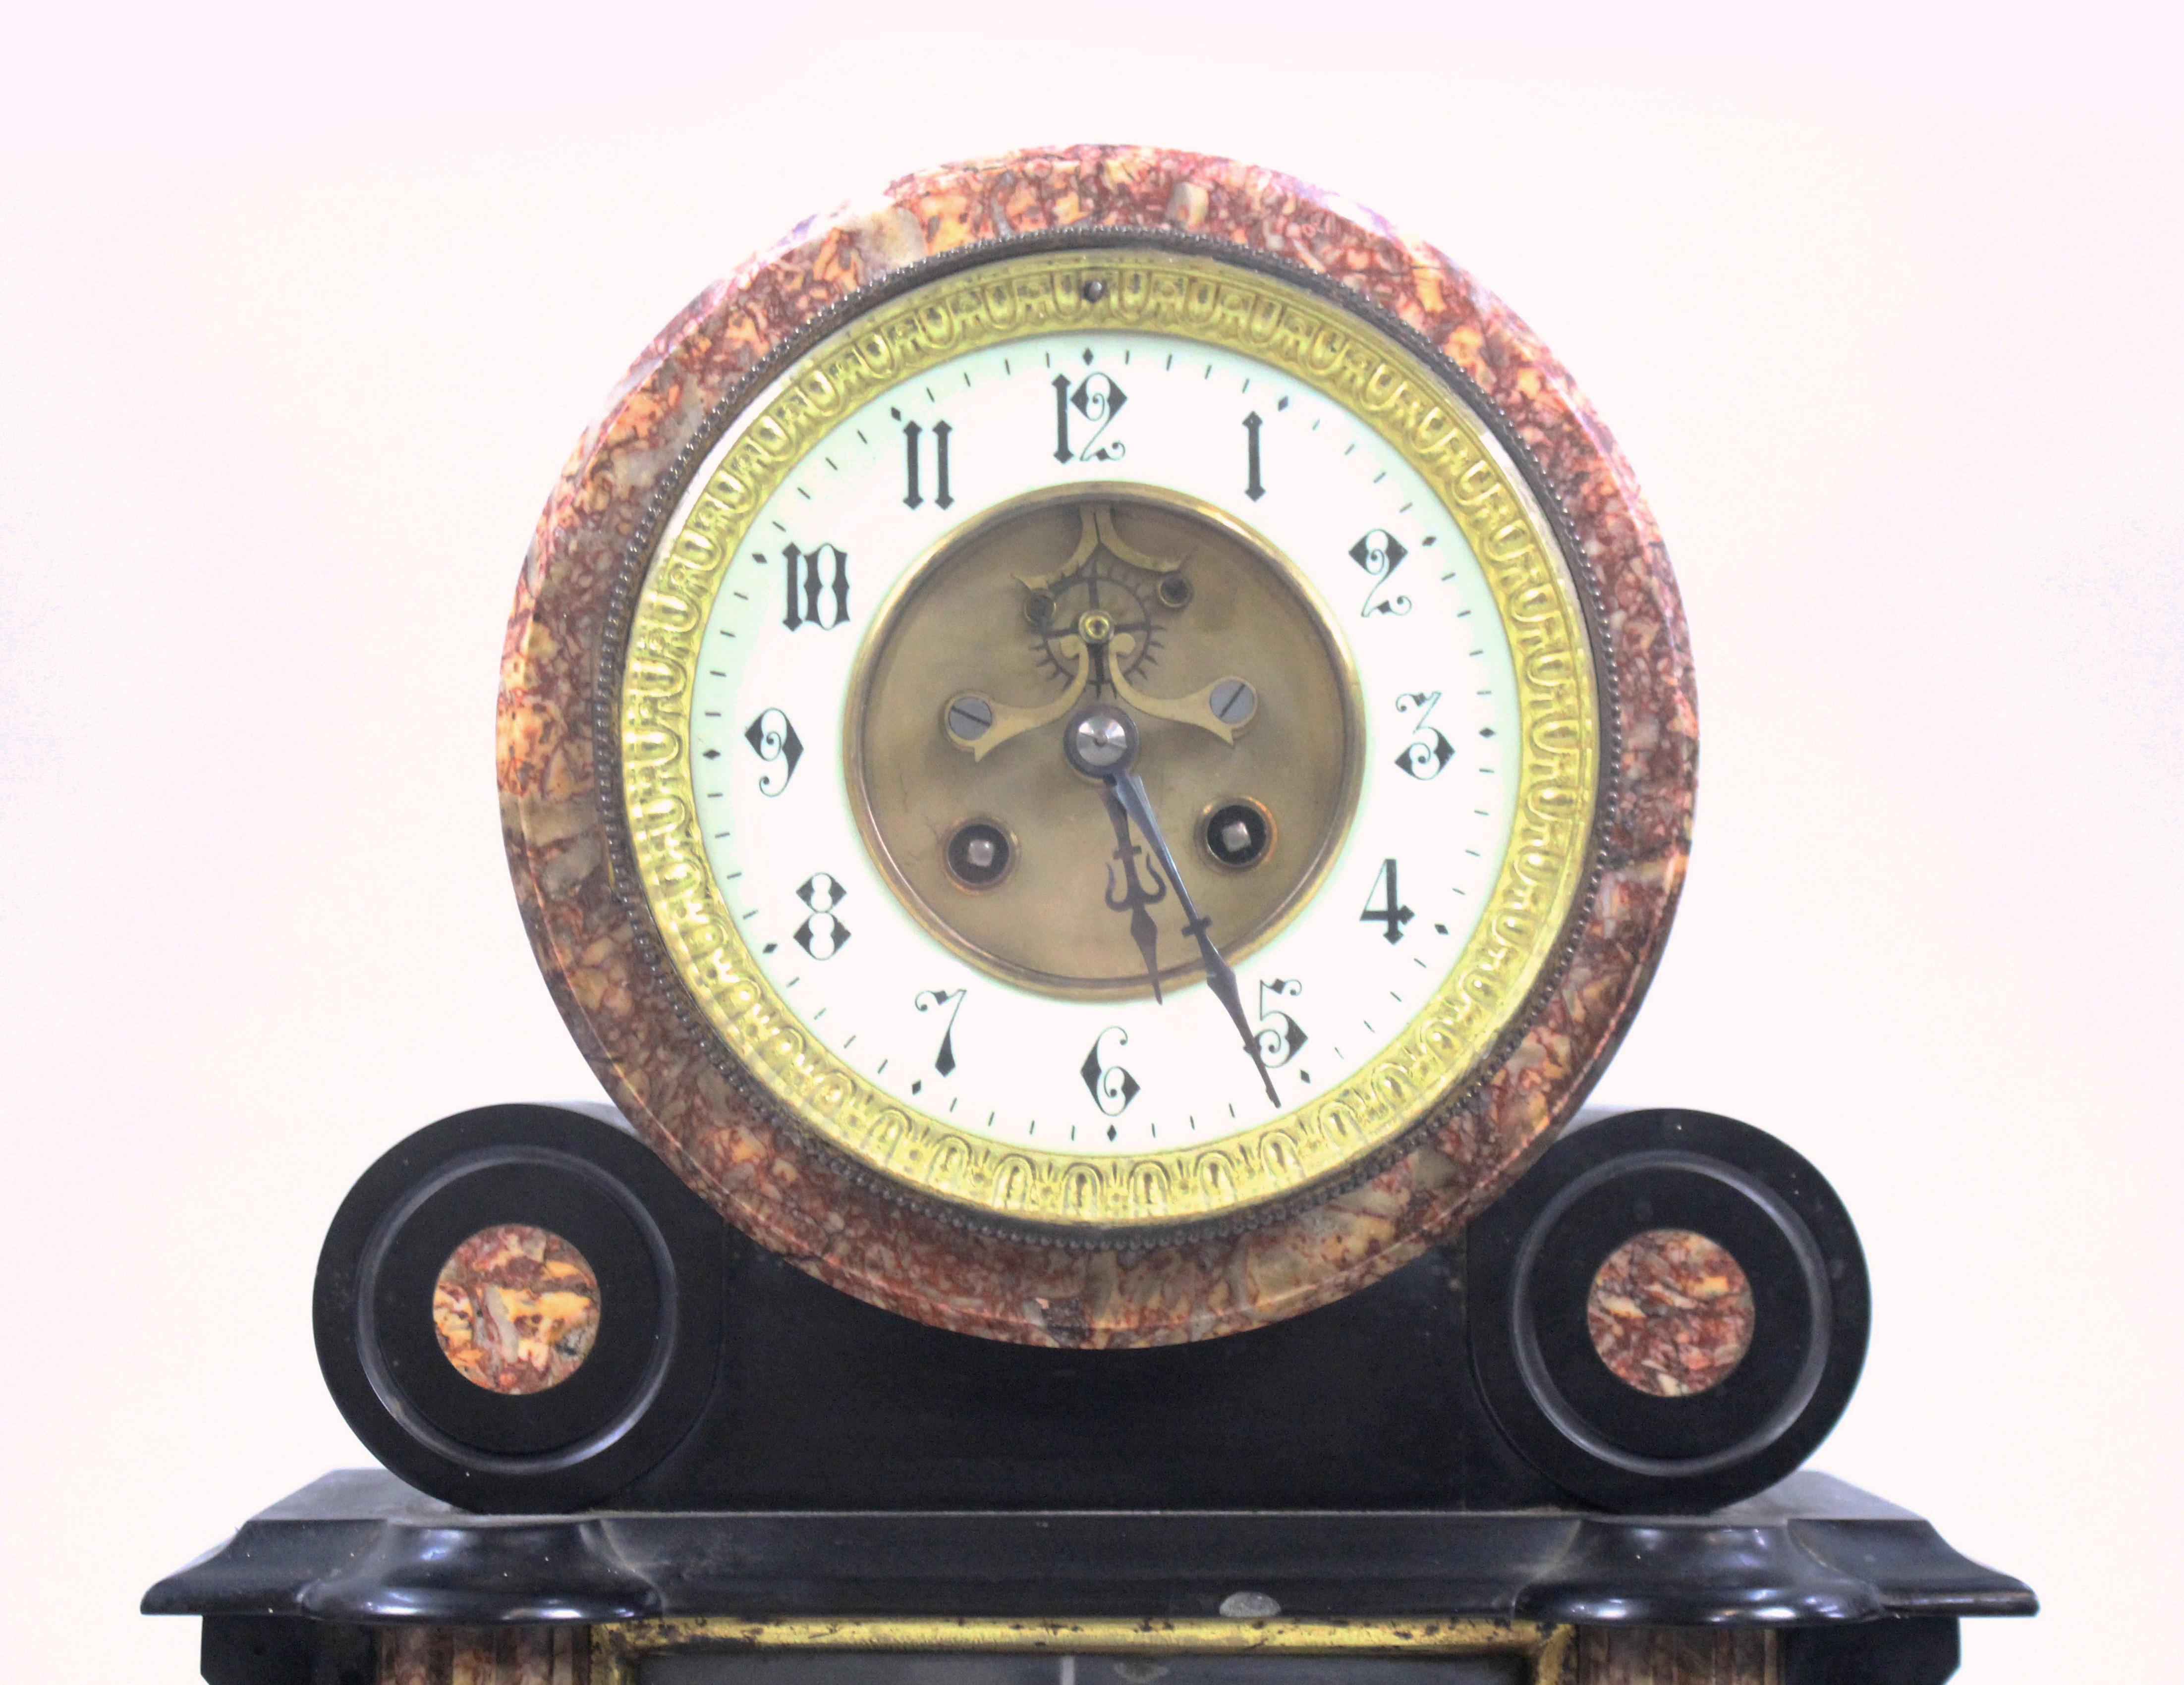 Period
19th century.

Dial
enamel dial with Roman numerals, brass hands, two winding holes, brassouter ring

Decoration 
marble body with bronze putti atop, brass globe and telescope. Heavy ornate ormolu mounts to the body, ormolu